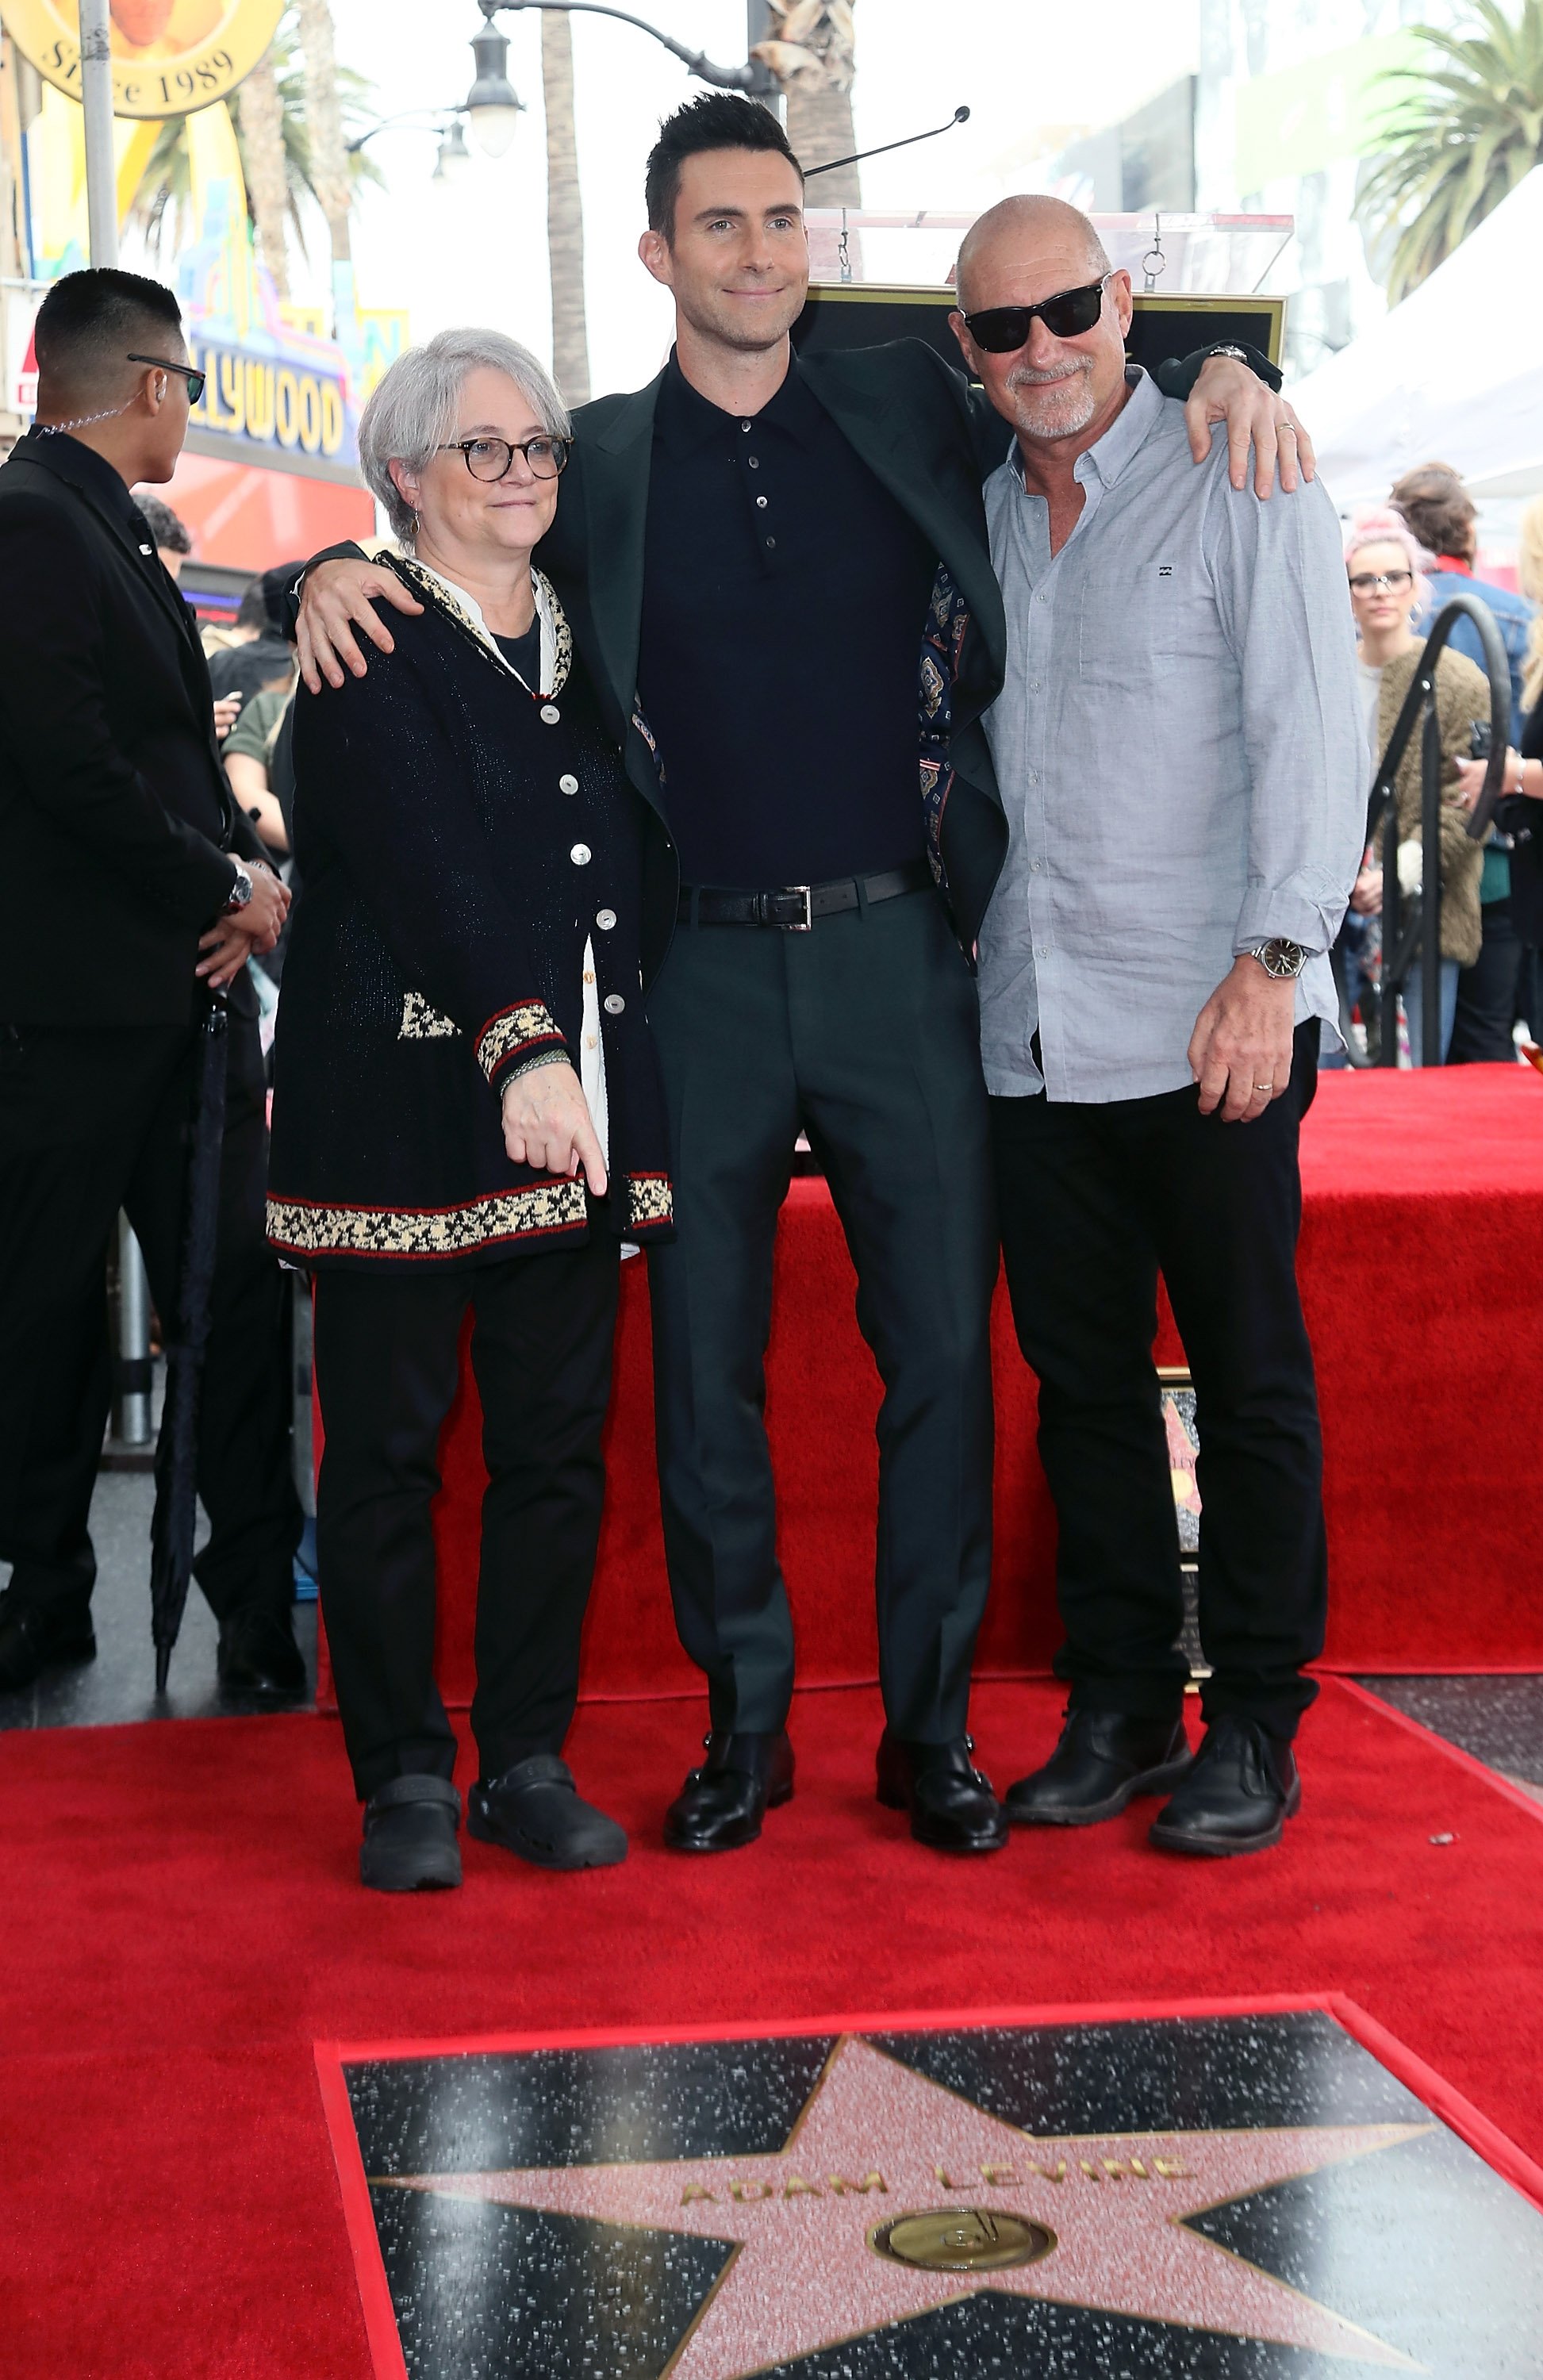 Adam Levine poses with parents, Patsy Noah and Fred Levine, as he was honored with a Star on the Hollywood Walk of Fame on February 10, 2017 | Source: Getty Images